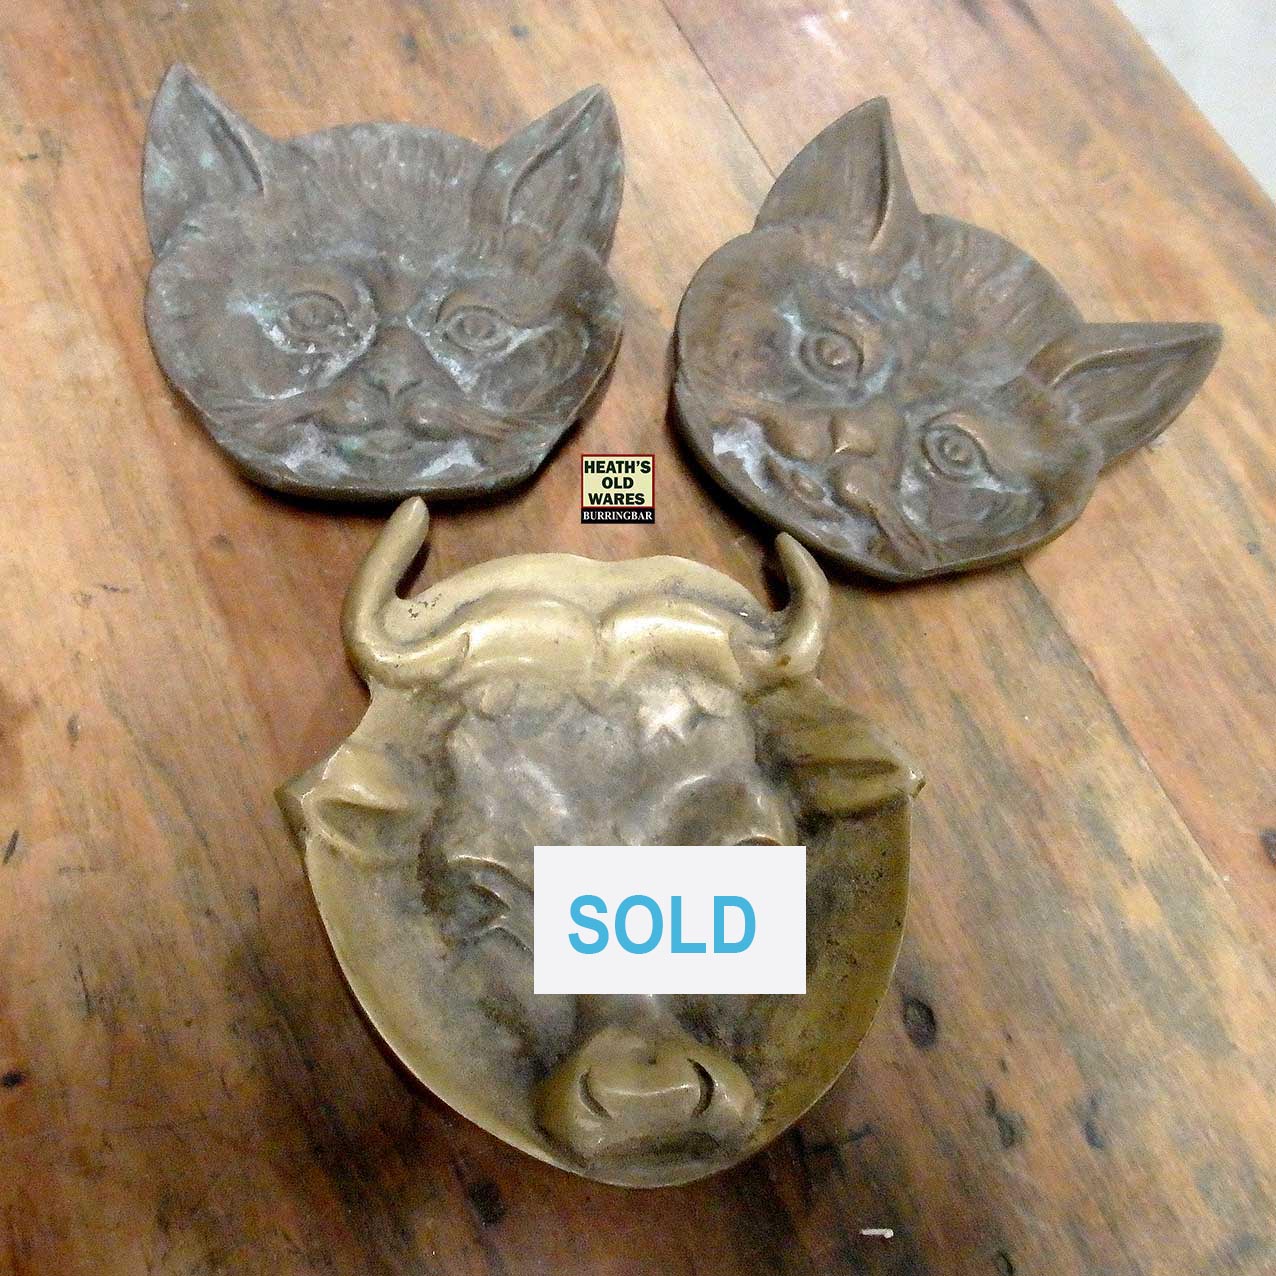 brass cat and bull dishes for sale at Heaths Old Wares, Collectables, Antiques & Industrial Antiques, 19-21 Broadway, Burringbar NSW 2483 Ph 0266771181 open 7 days